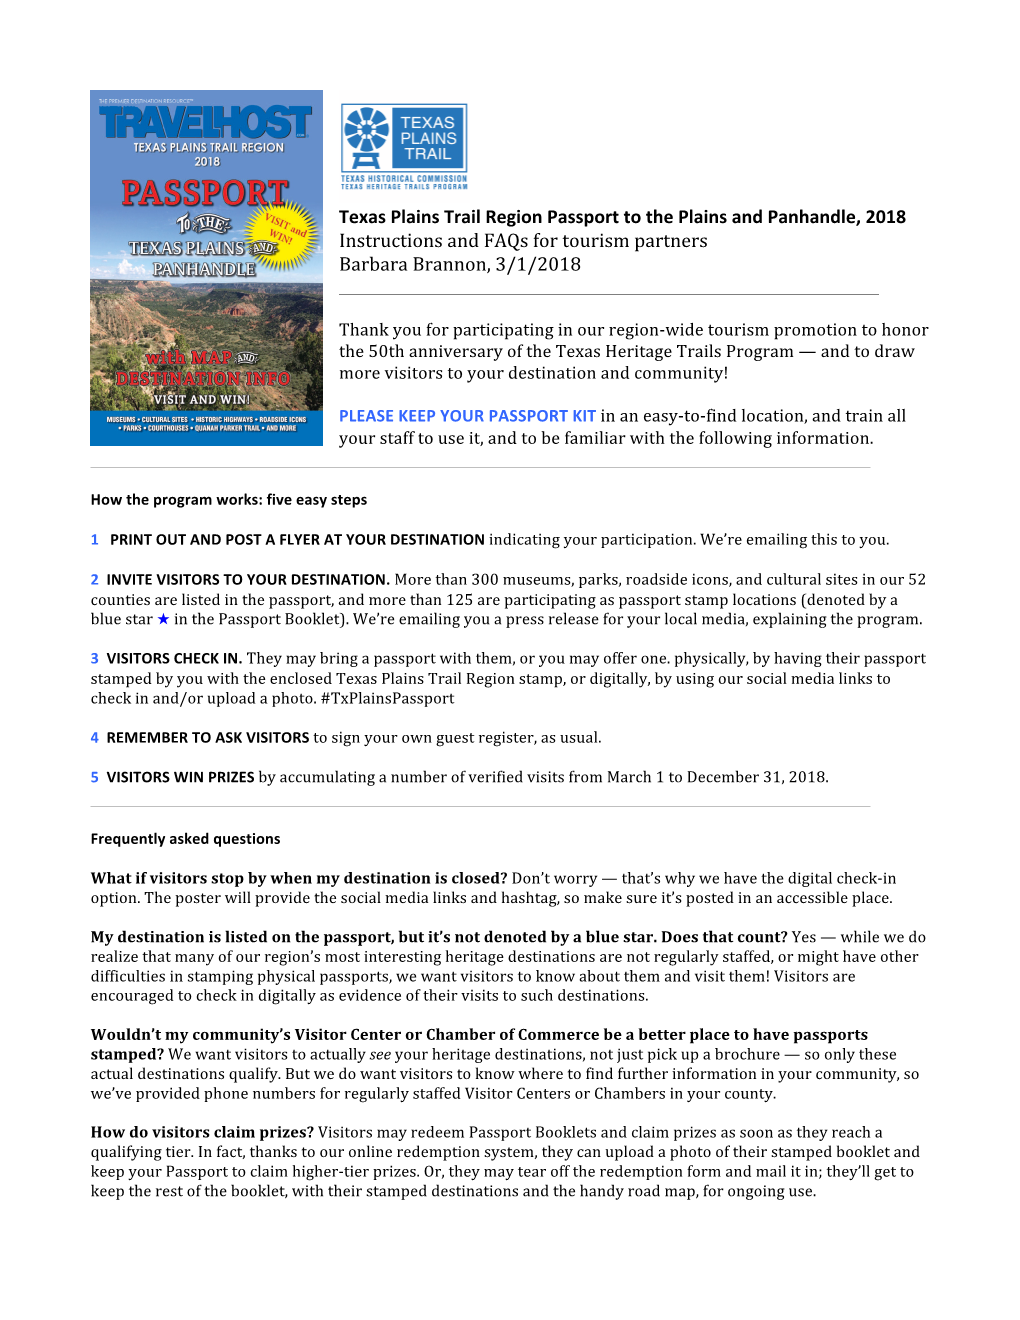 Texas Plains Trail Region Passport to the Plains and Panhandle, 2018 Instructions and Faqs for Tourism Partners Barbara Brannon, 3/1/2018